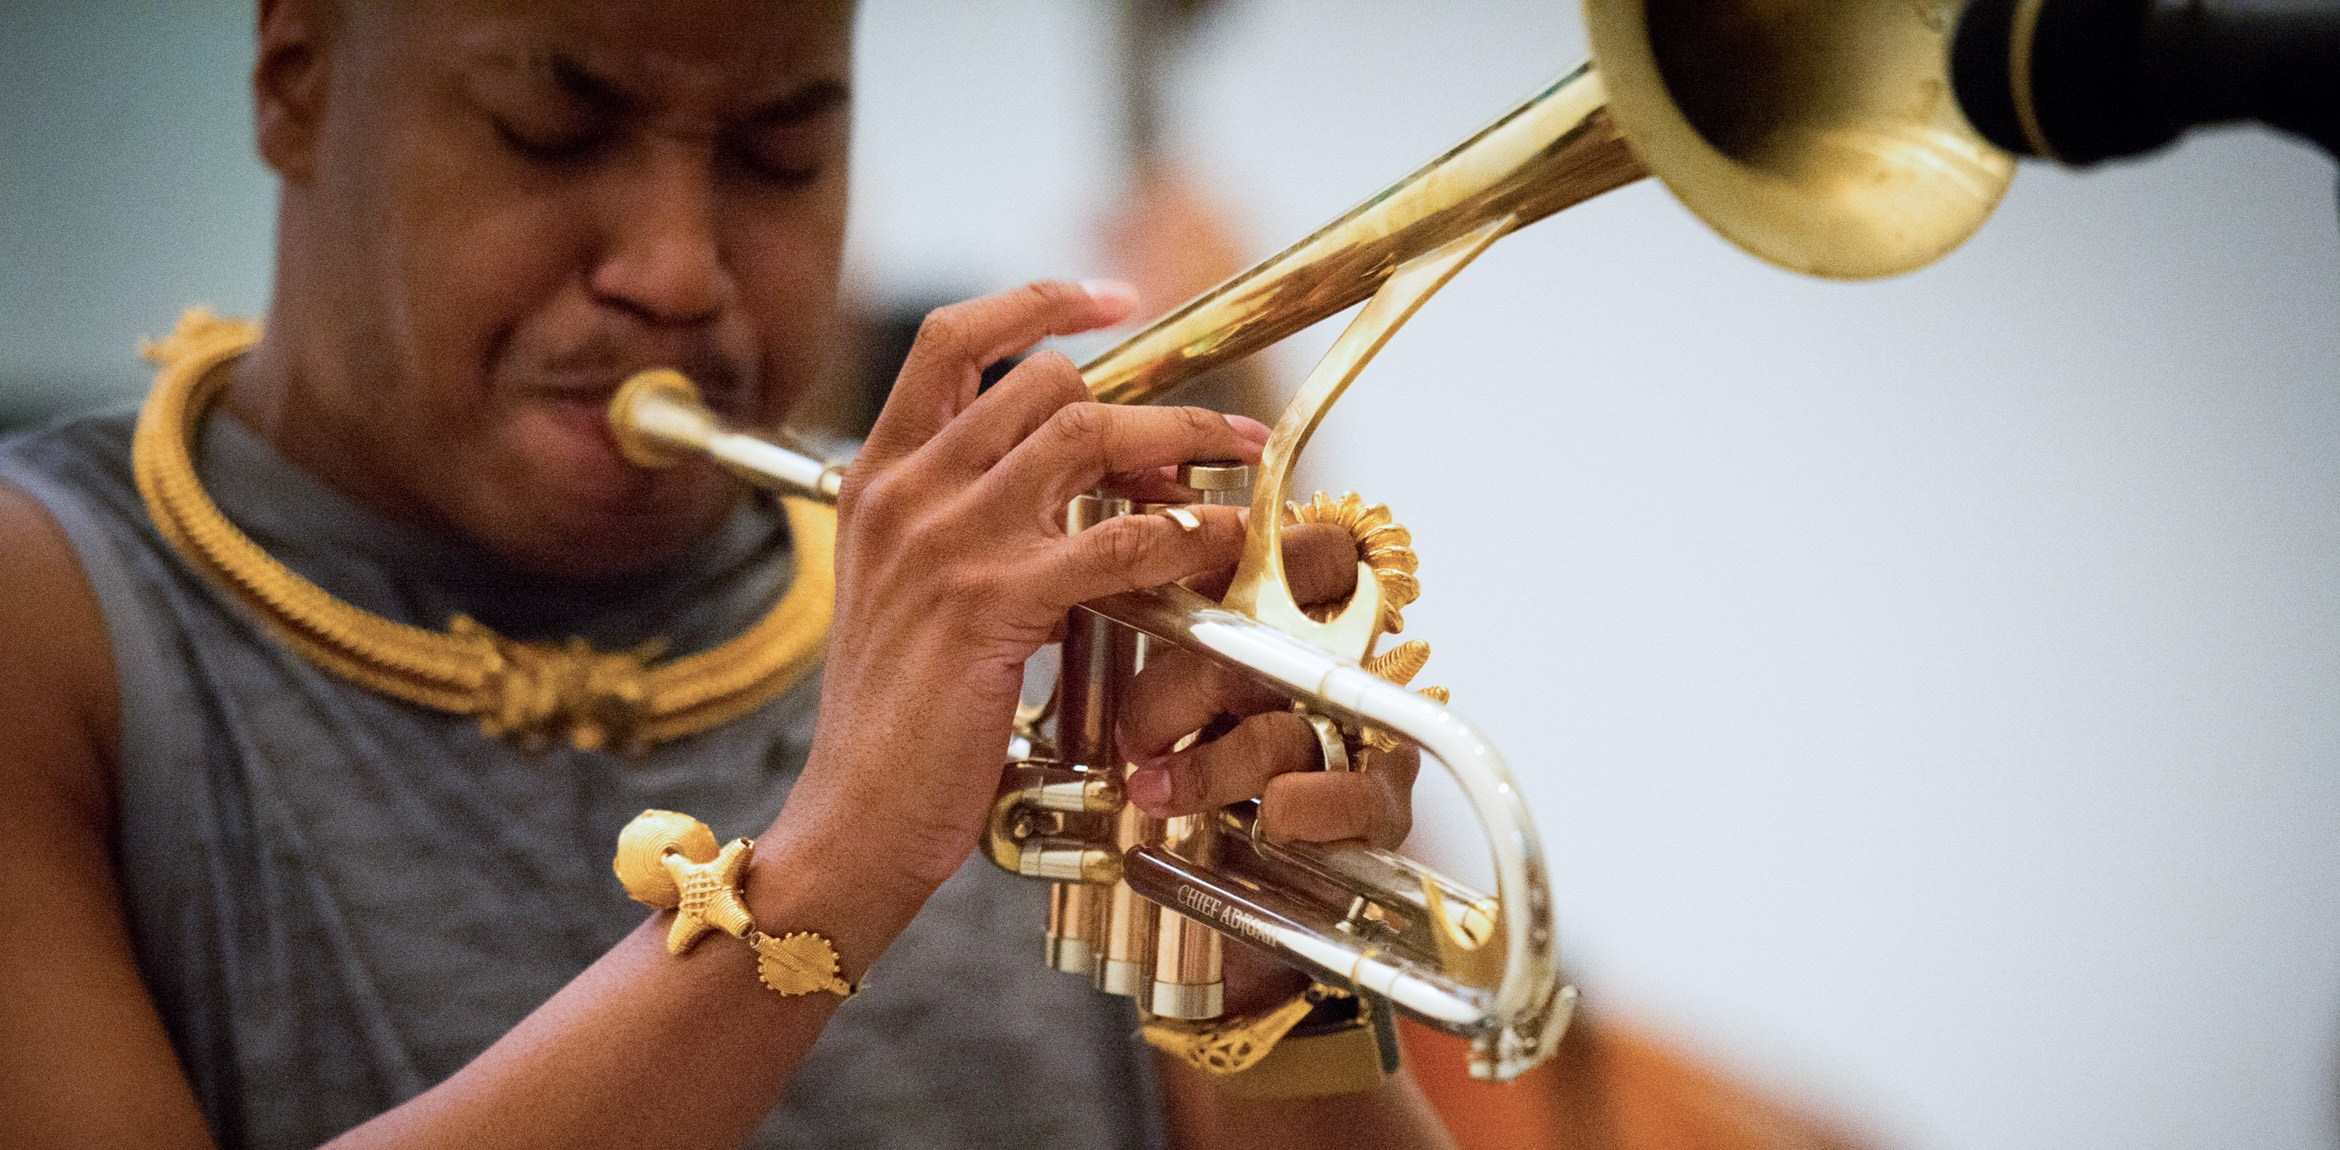 Christian Scott aTunde Adjuah plays the trumpet into a microphone. He wears a golden necklace, bracelets, and rings that match his trumpet.